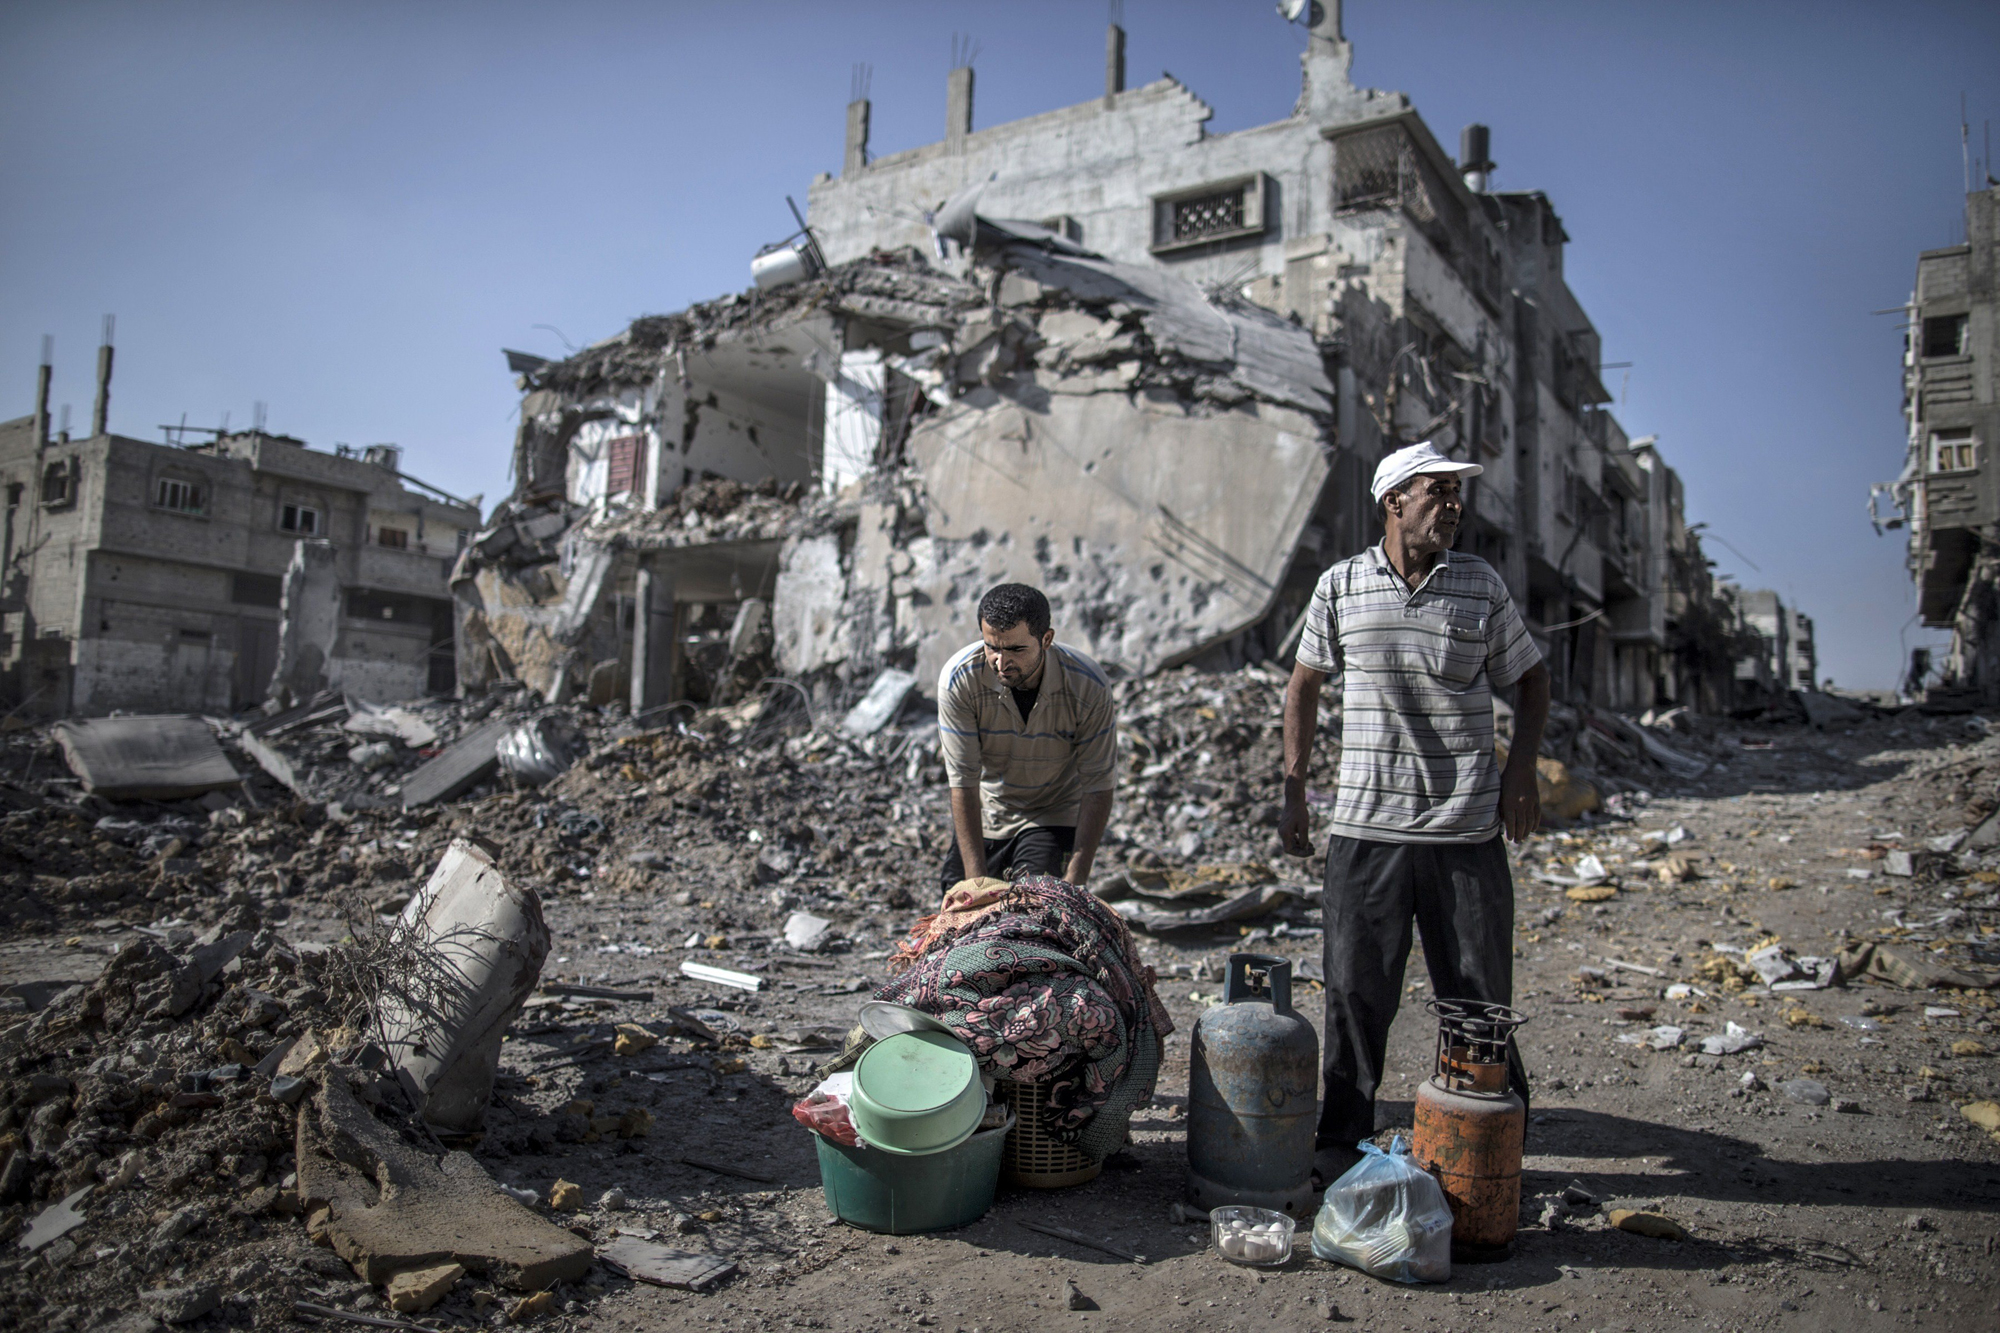 Palestinian men gather things they found in the rubble of destroyed buildings on July 27, 2014 in the Shejaiya residential district of Gaza City as families returned to find their homes ground into rubble by relentless Israeli tank fire and air strikes.